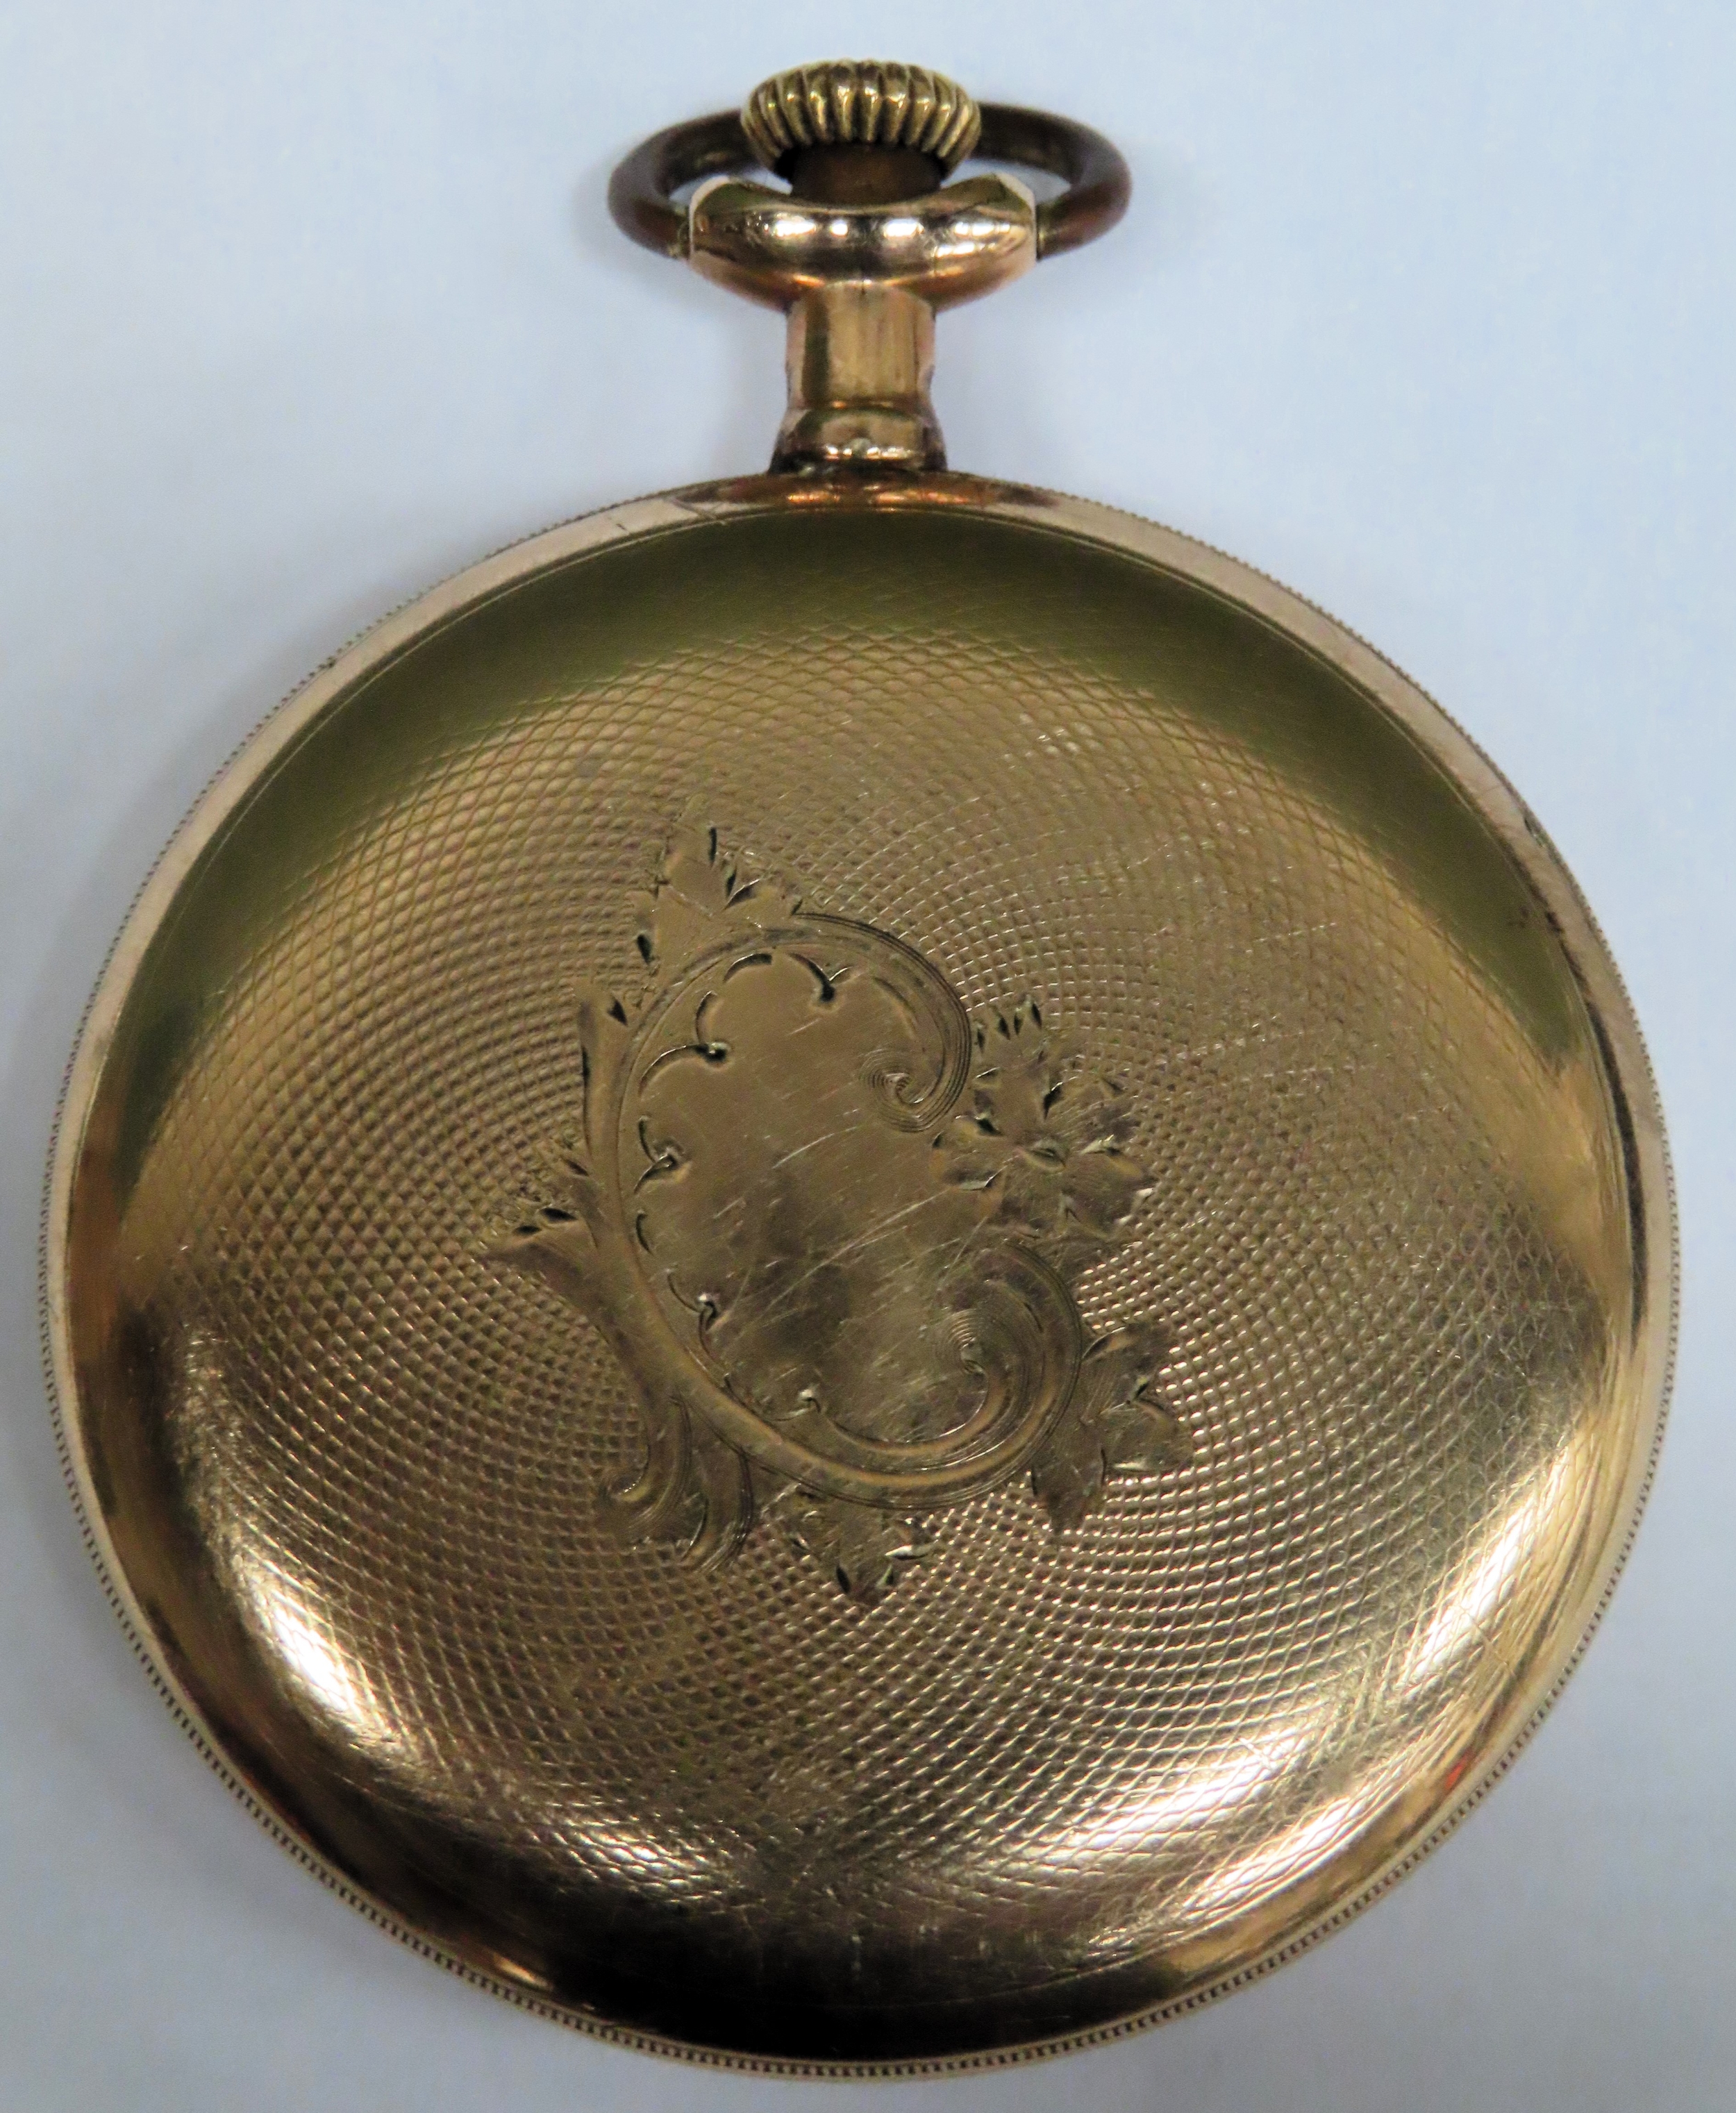 Waltham Gold plated Art Deco style pocket watch with enamelled dial Used condition, not tested for - Image 2 of 2